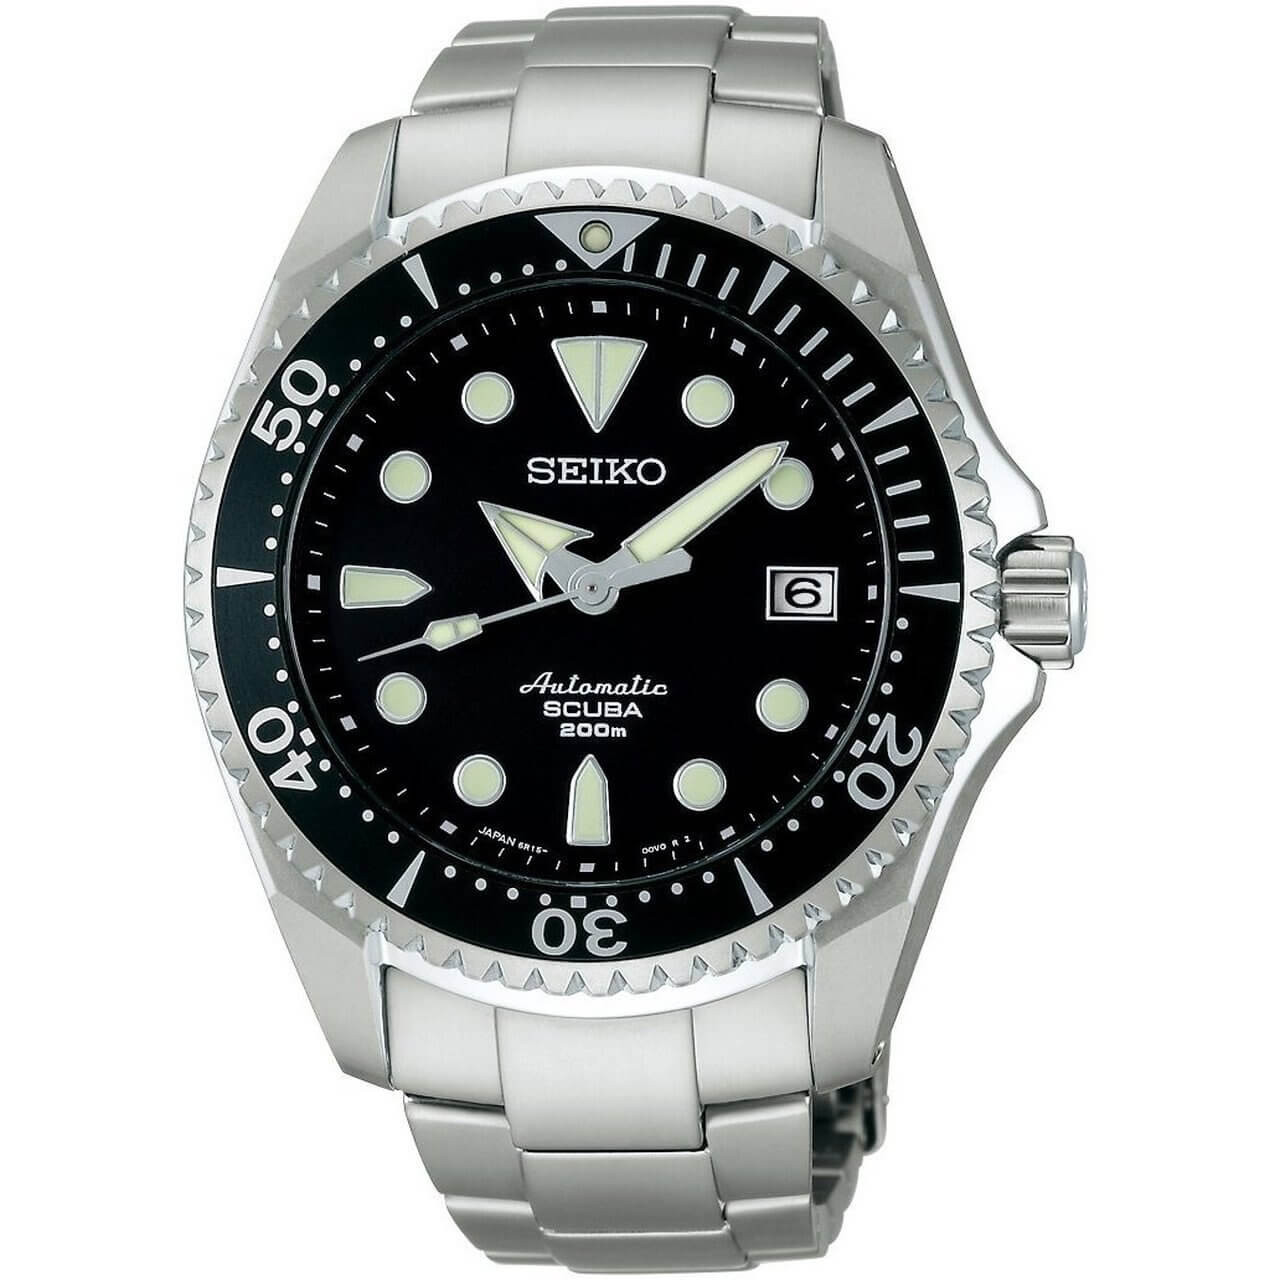 Seiko Divers Watch 200m Automatic Price Outlet, 59% OFF 